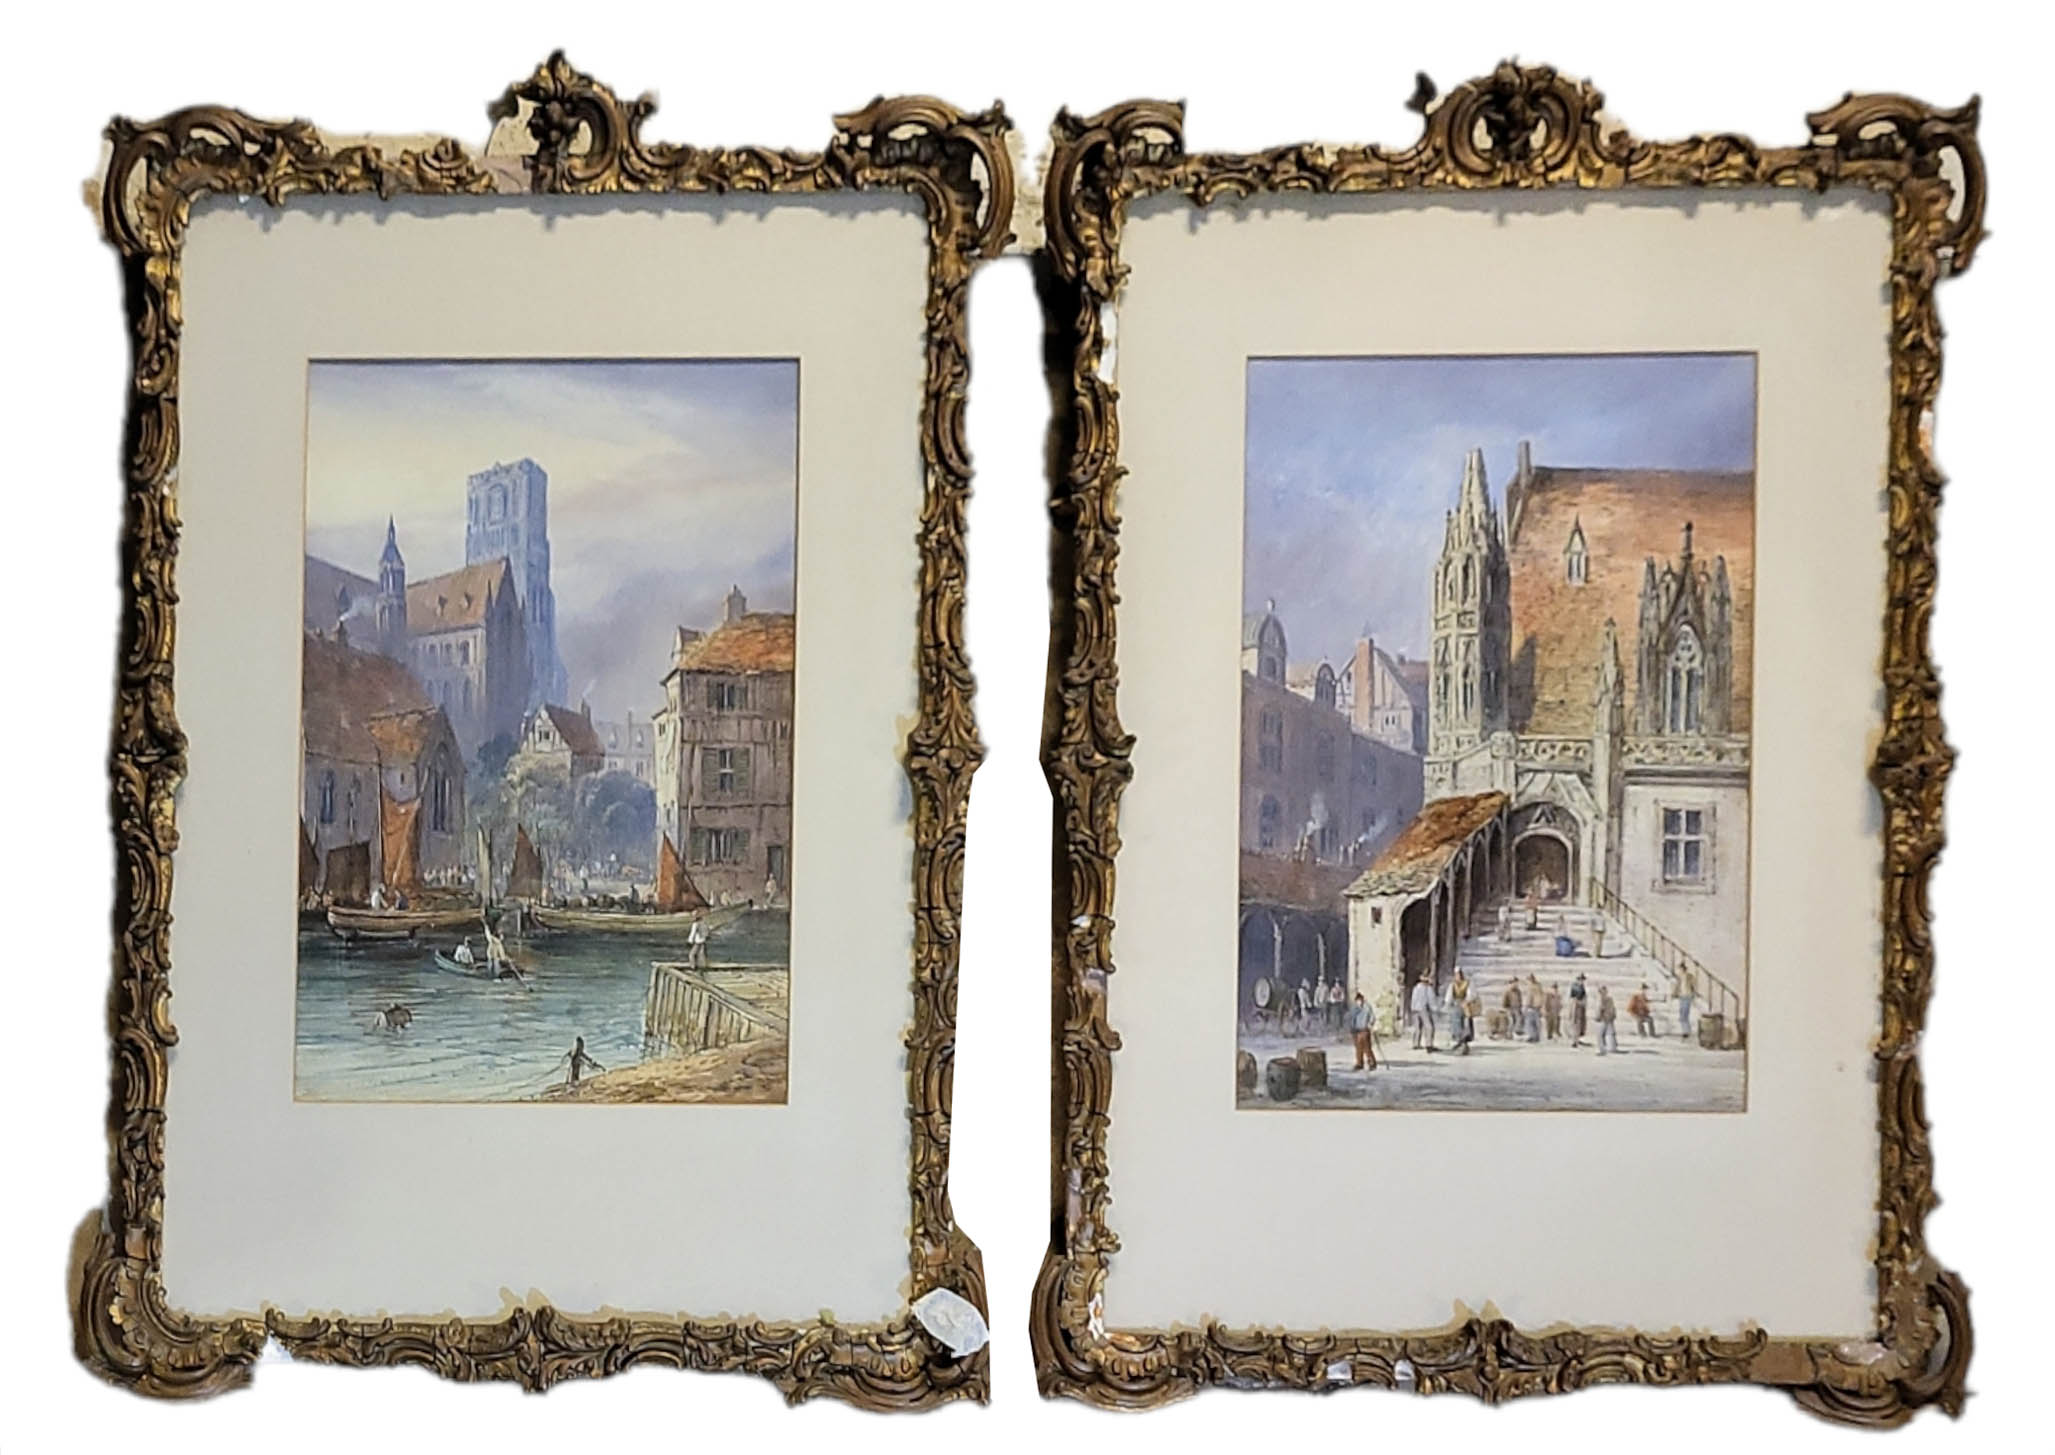 LENNARD LEWIS (1826-1913) , A PAIR OF 19TH CENTURY WATERCOLOUR Landscapes, Continental architectural